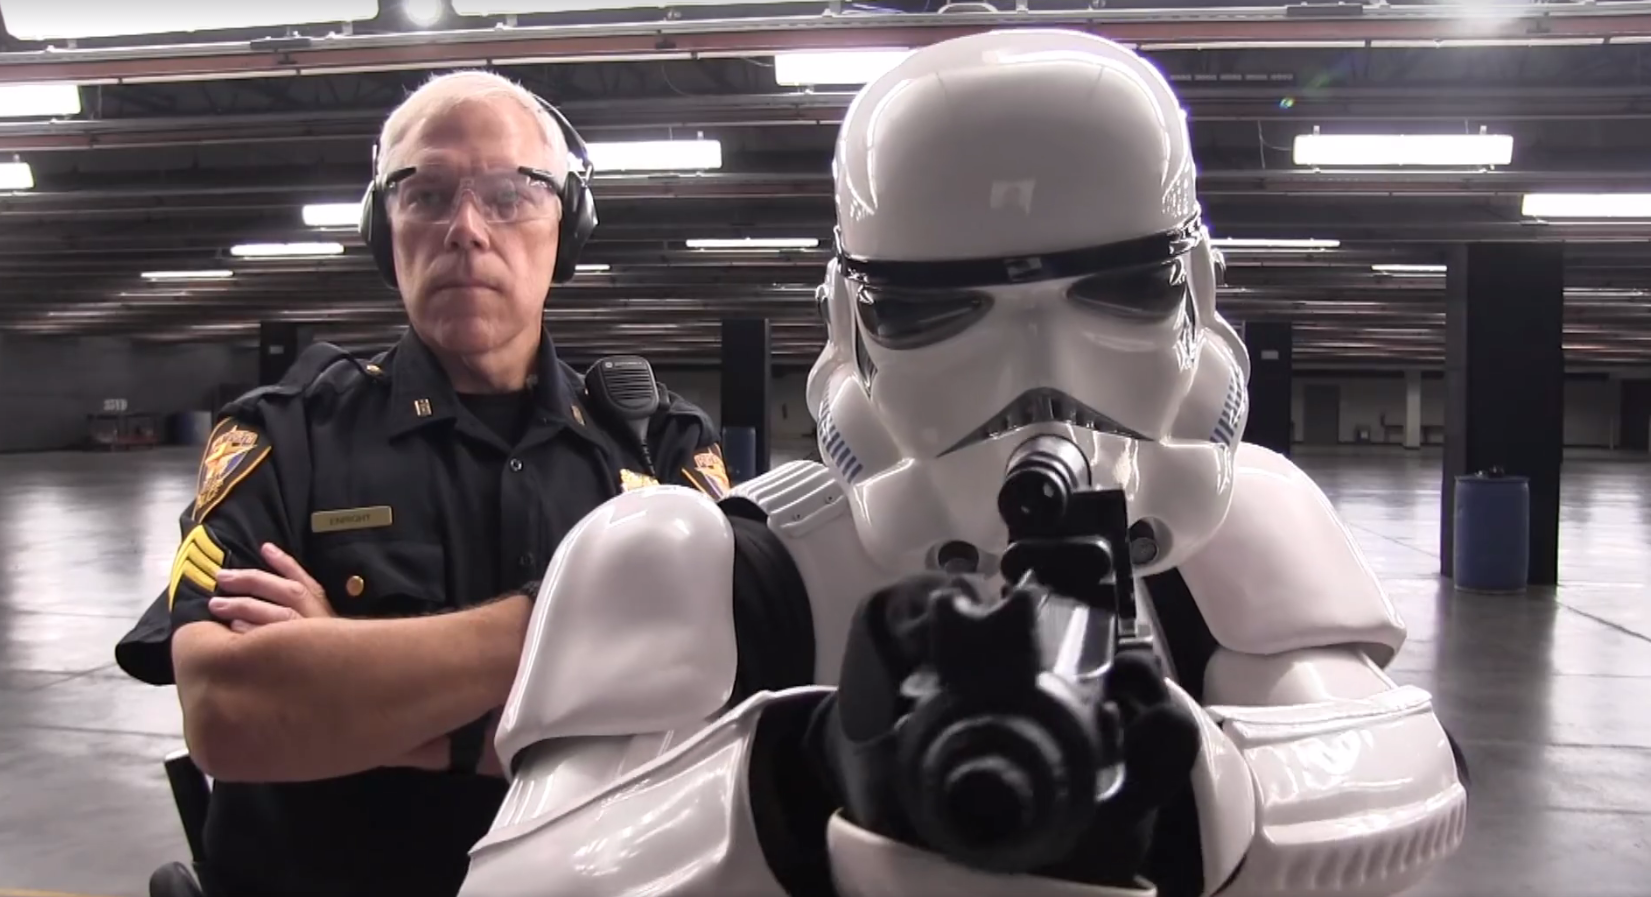 Us Police Officer Xxx Video - Stormtroopers aren't good enough for the Fort Worth Police Department,  according to their recruitment video